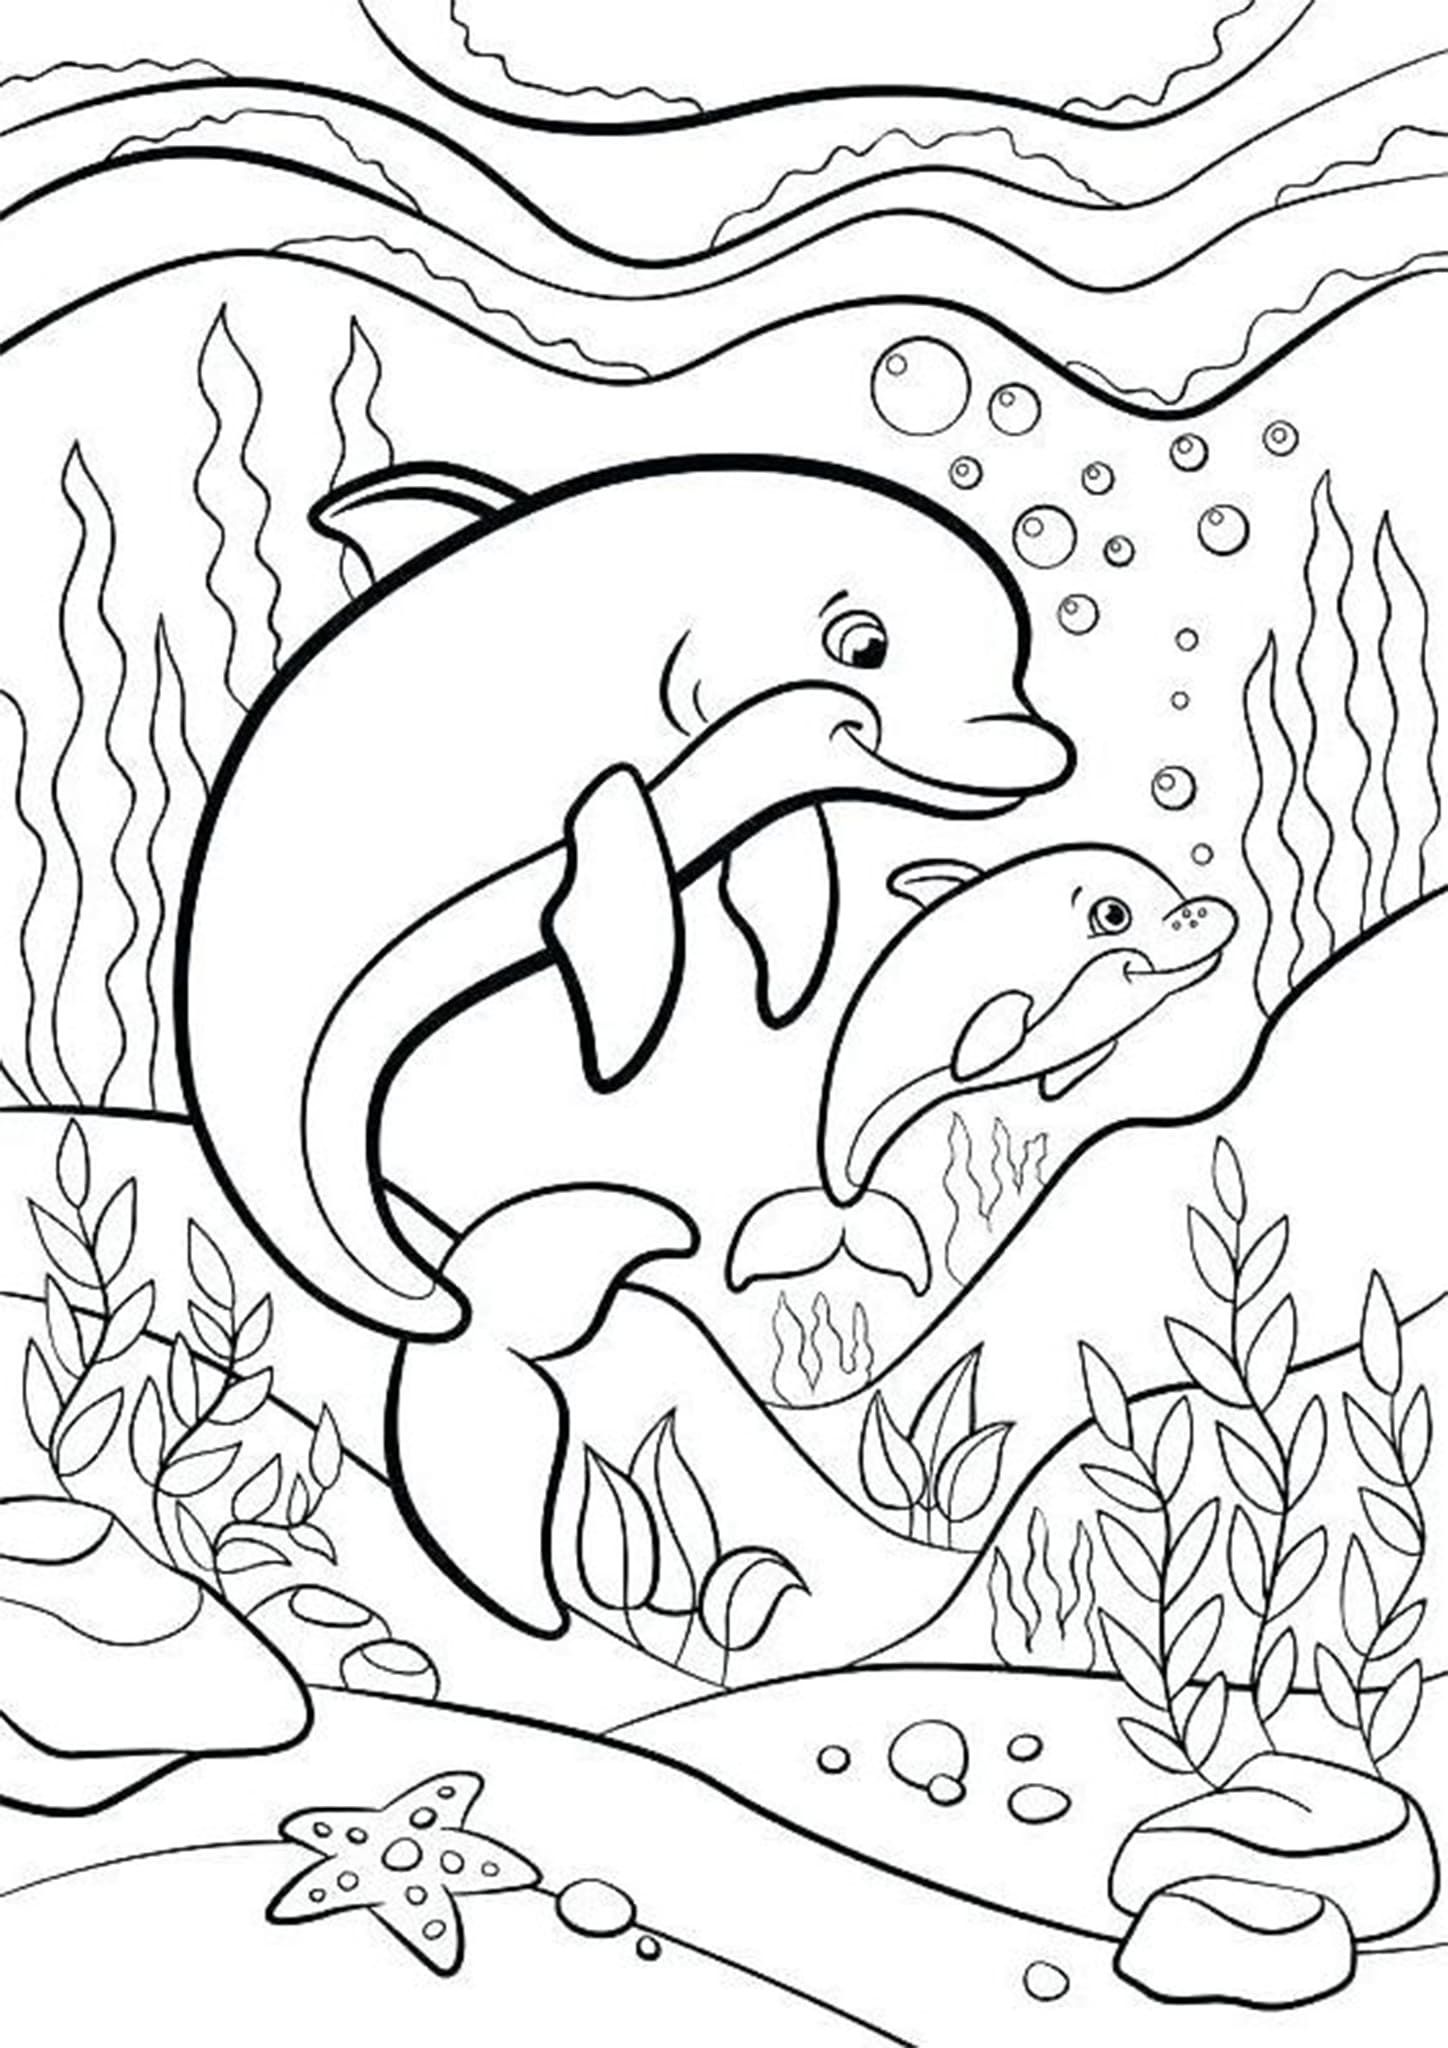 Free easy to print dolphin coloring pages dolphin coloring pages ocean coloring pages animal coloring pages